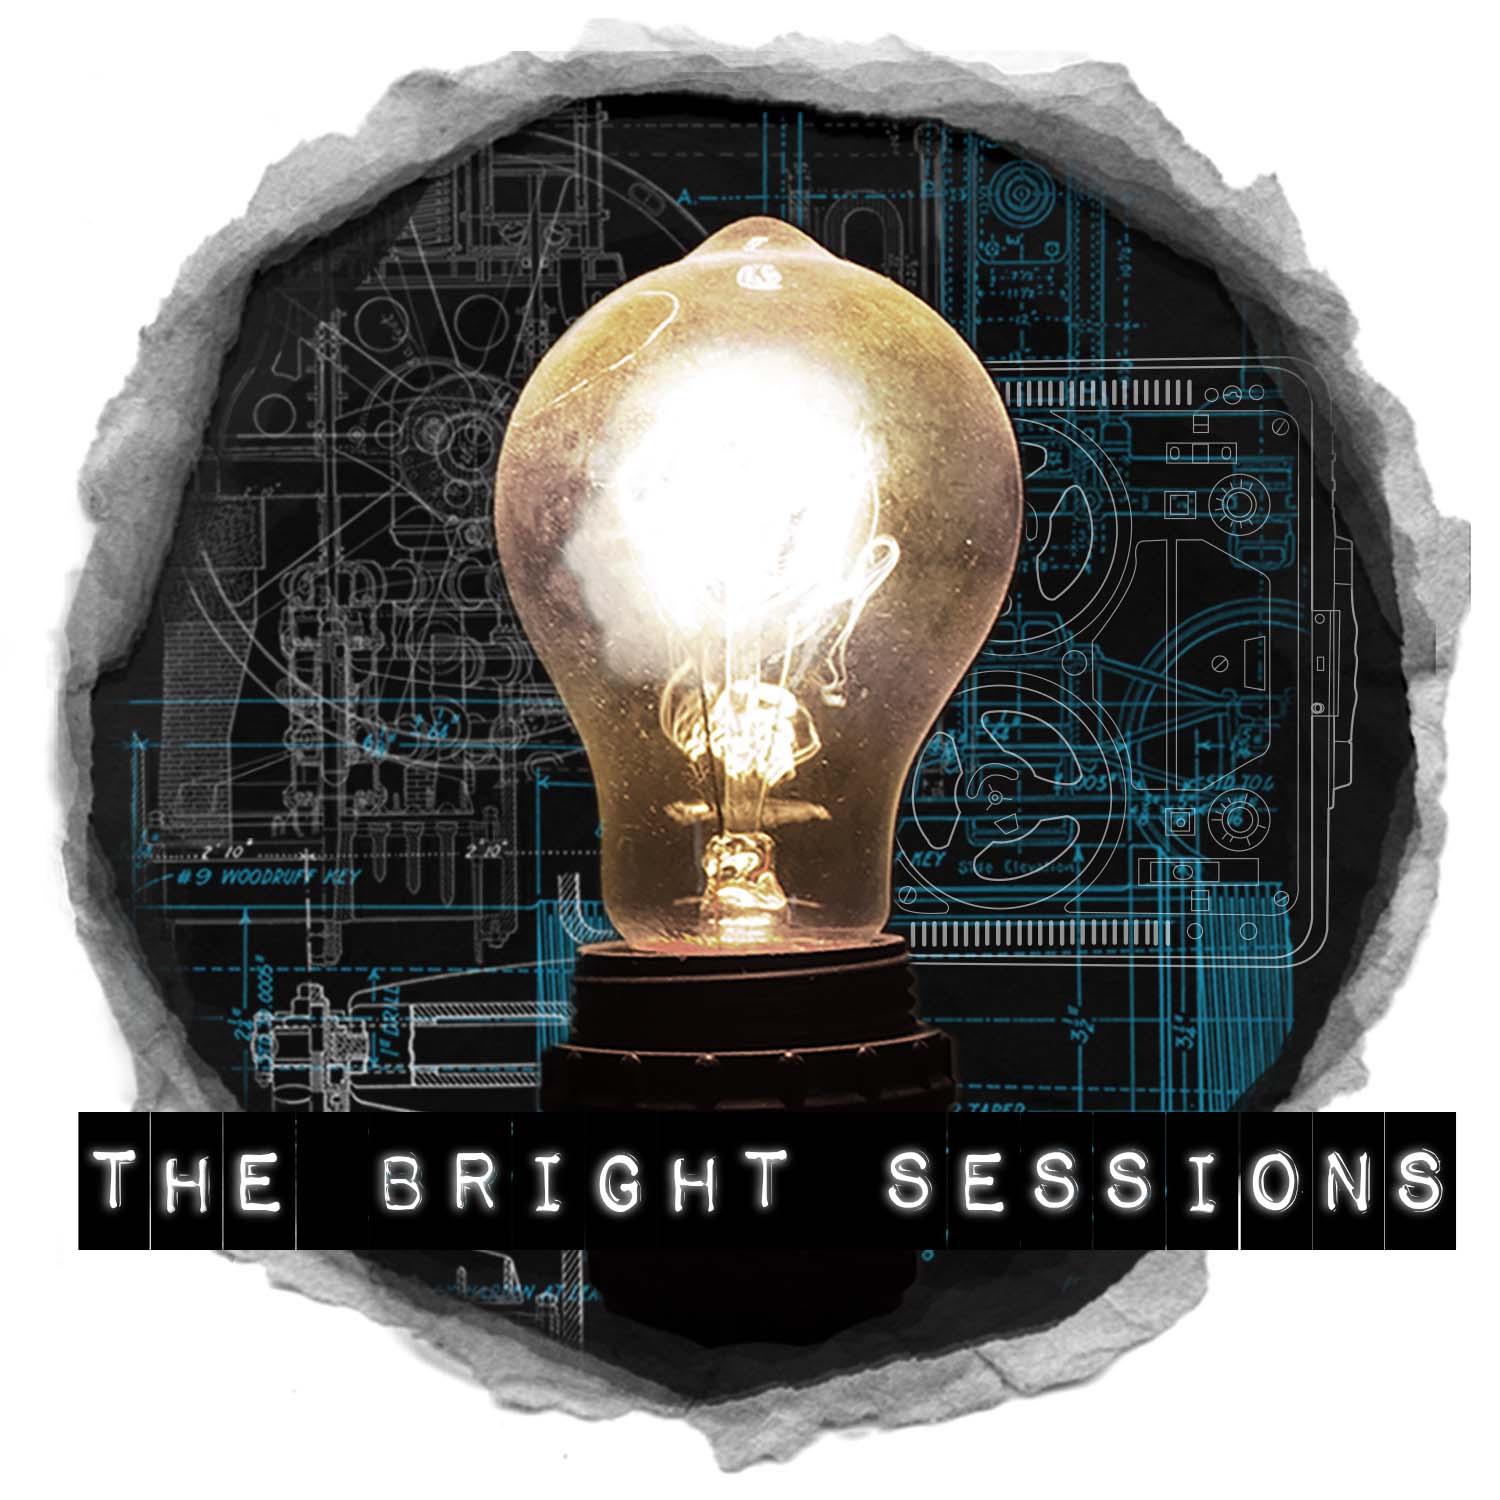 www.thebrightsessions.com